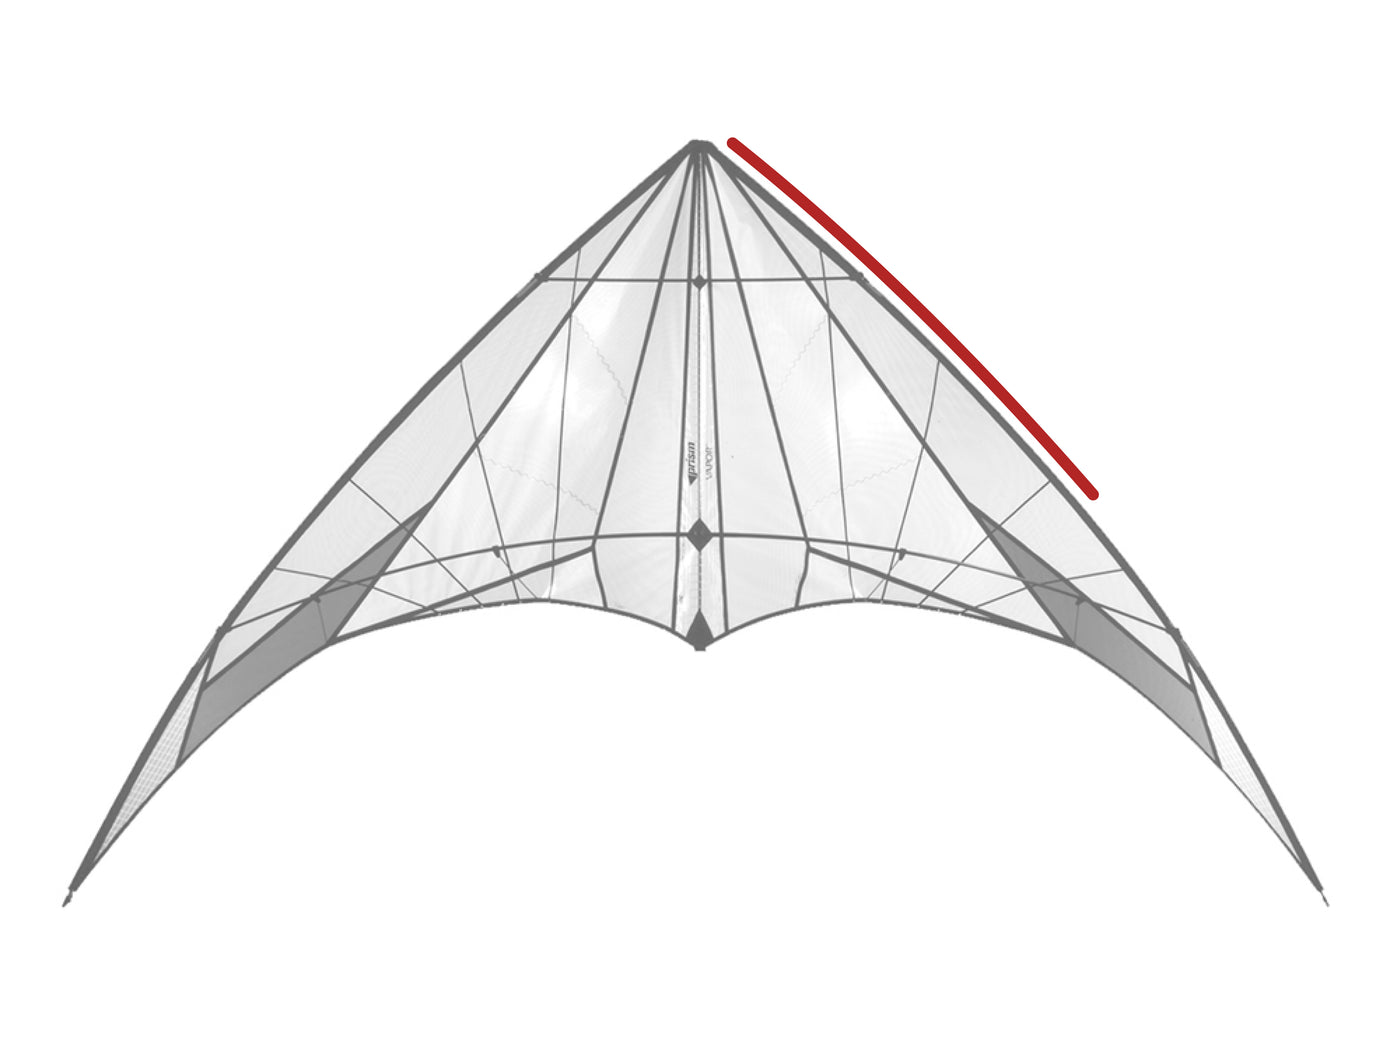 Diagram showing location of the Vapor (1996) Upper Leading Edge on the kite.